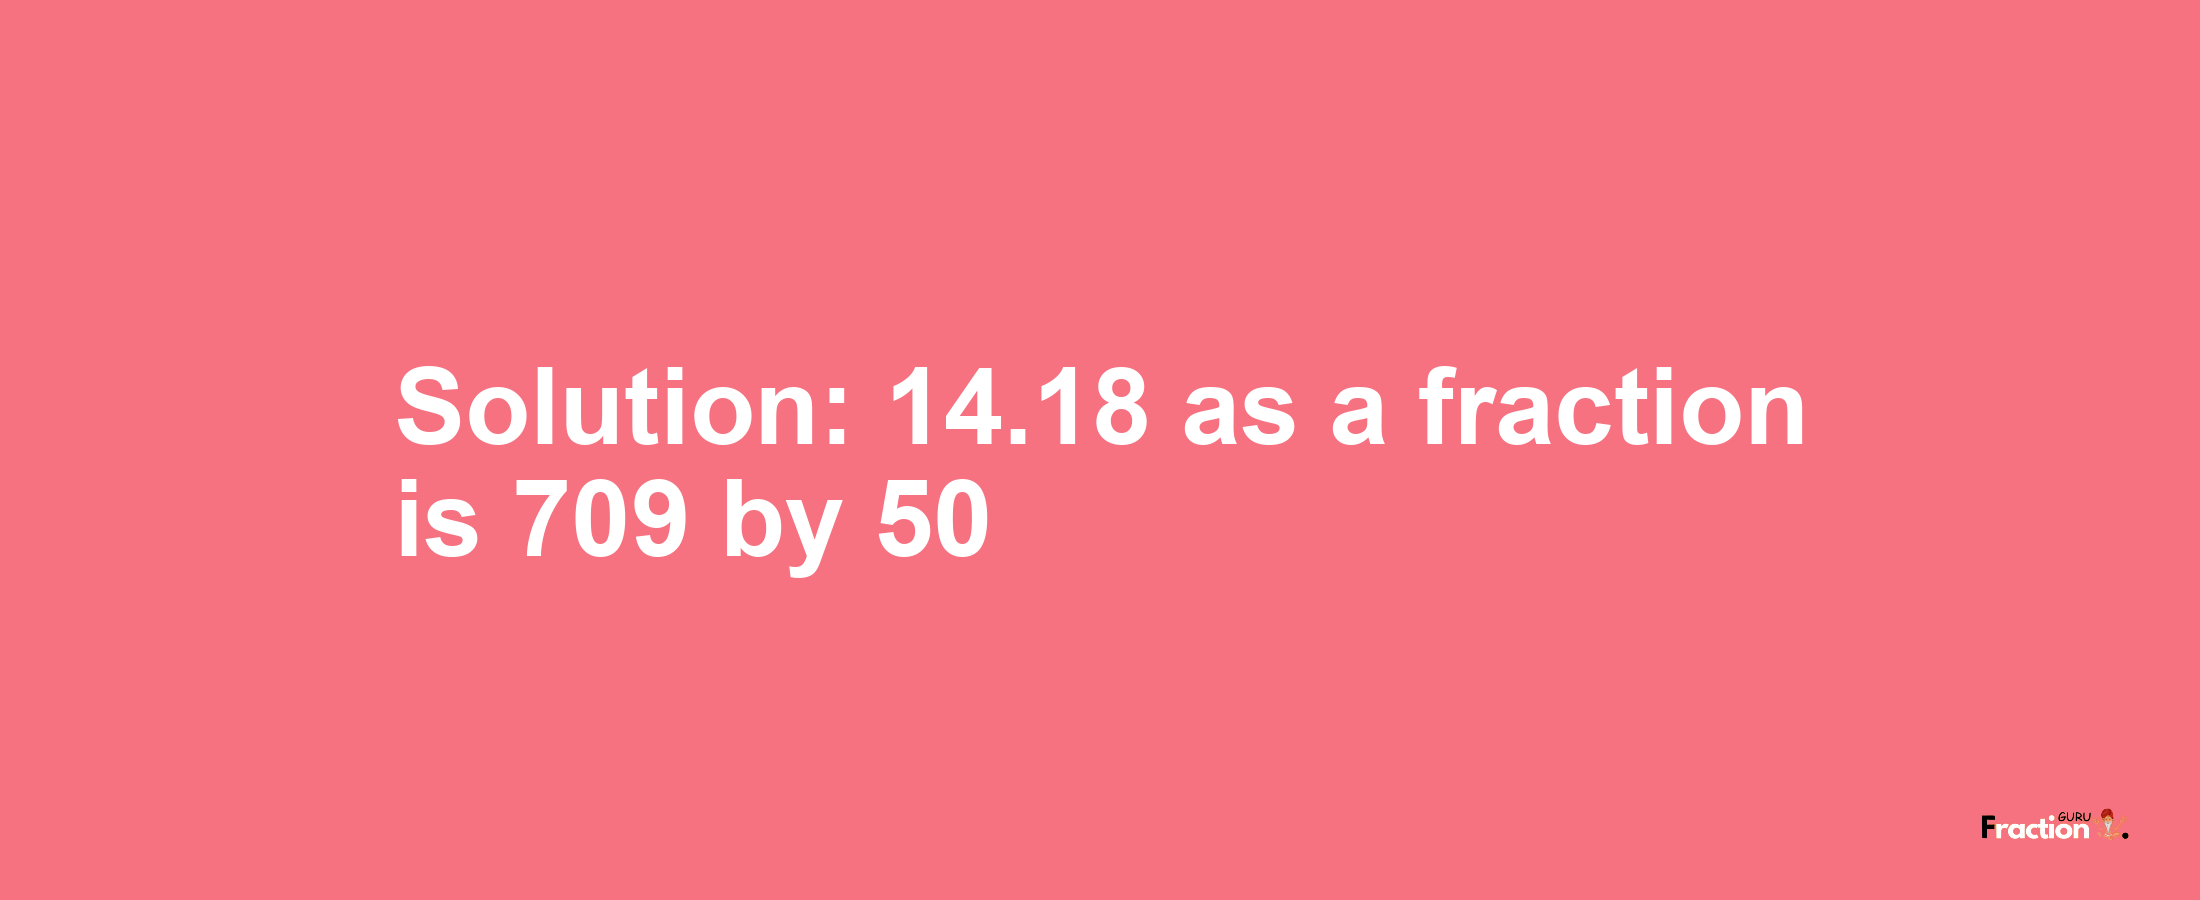 Solution:14.18 as a fraction is 709/50